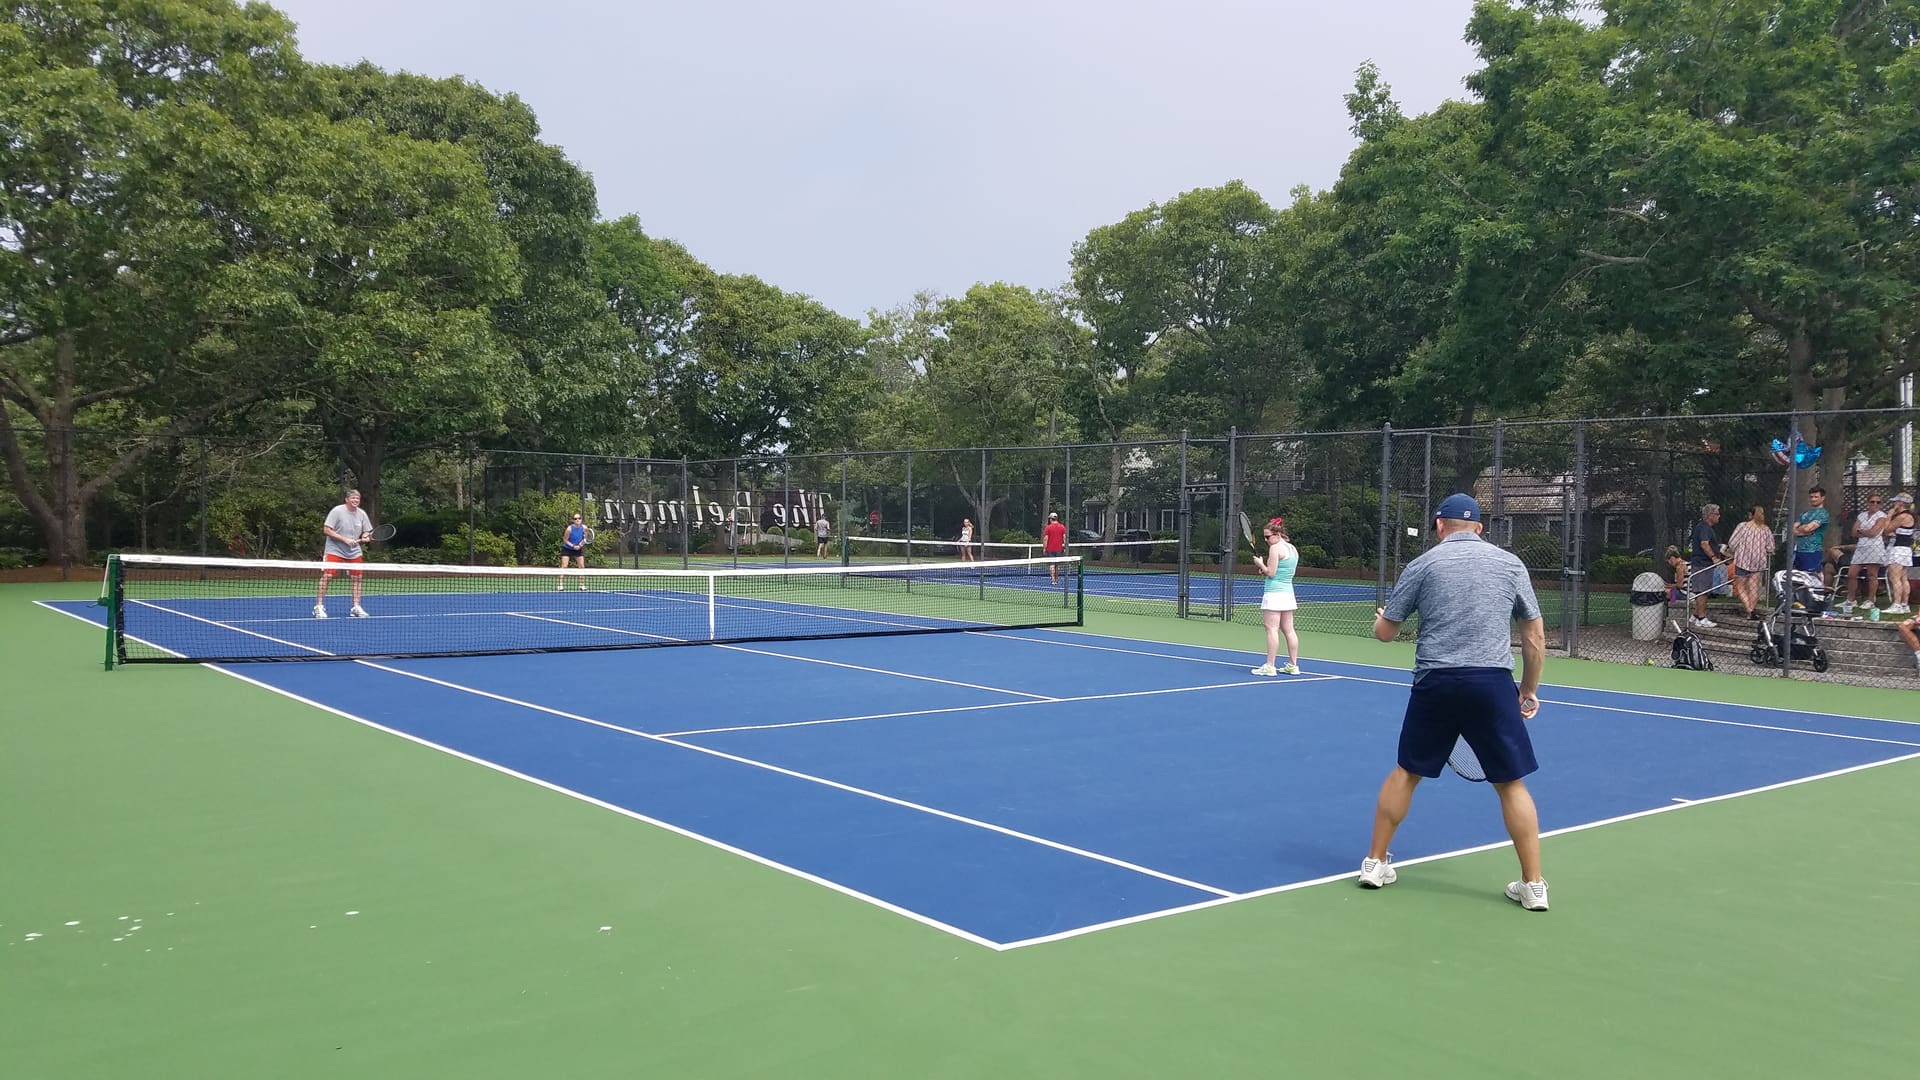 A group of people playing tennis on a blue court.